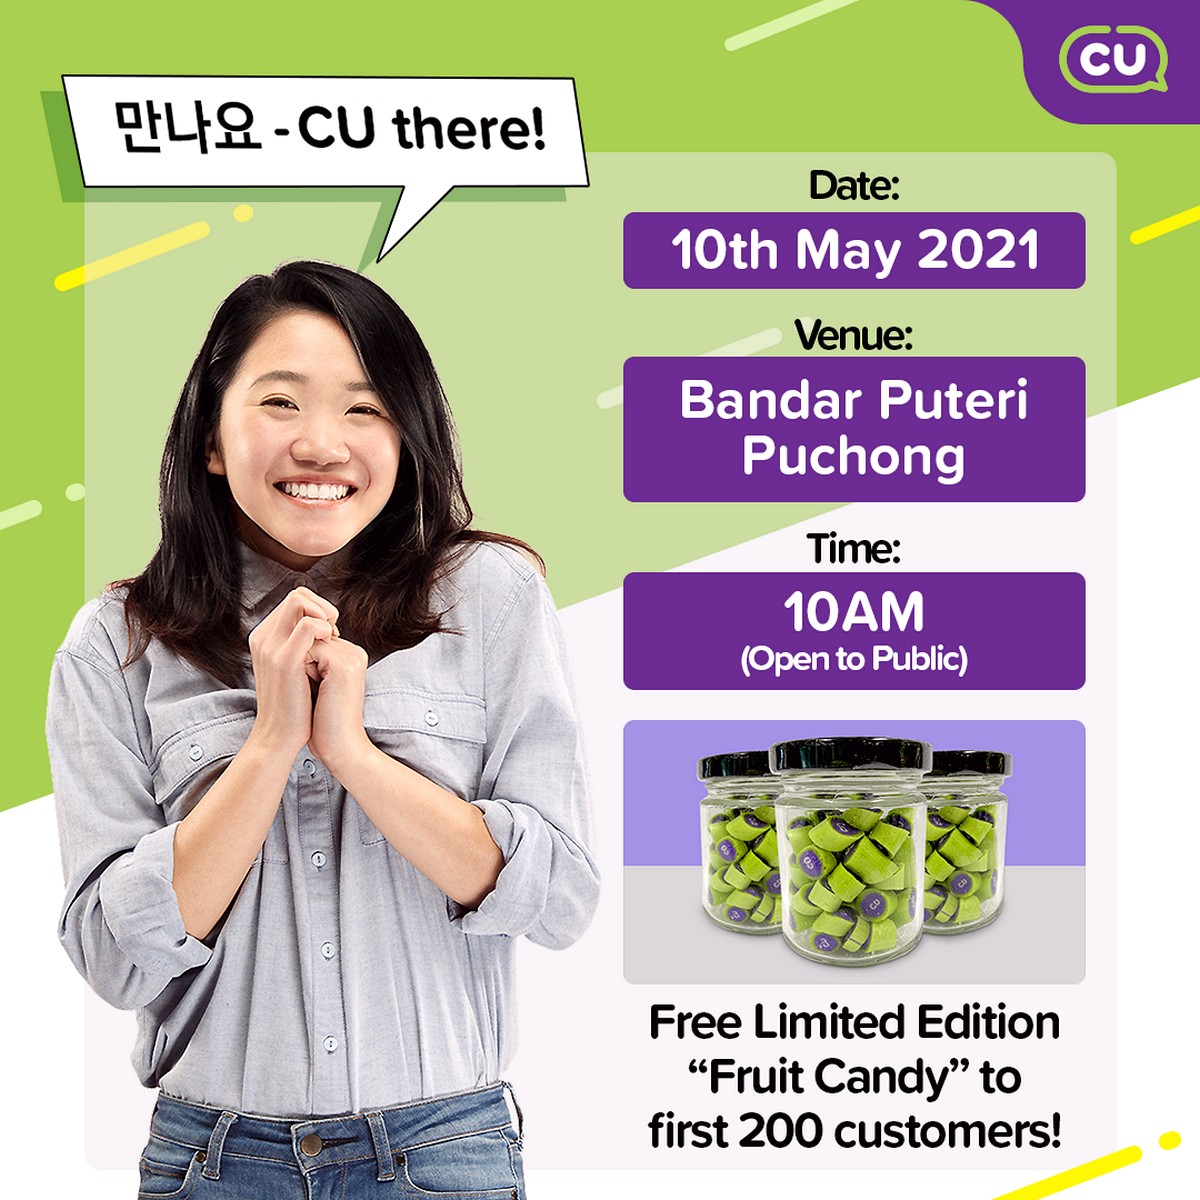 Bandar-Puteri-Puchong-CU-convenience-store-Opening-Free-Limited-Edition-Fruit-Candy-Giveaway-2021-Address - Others Promotions & Freebies Selangor 